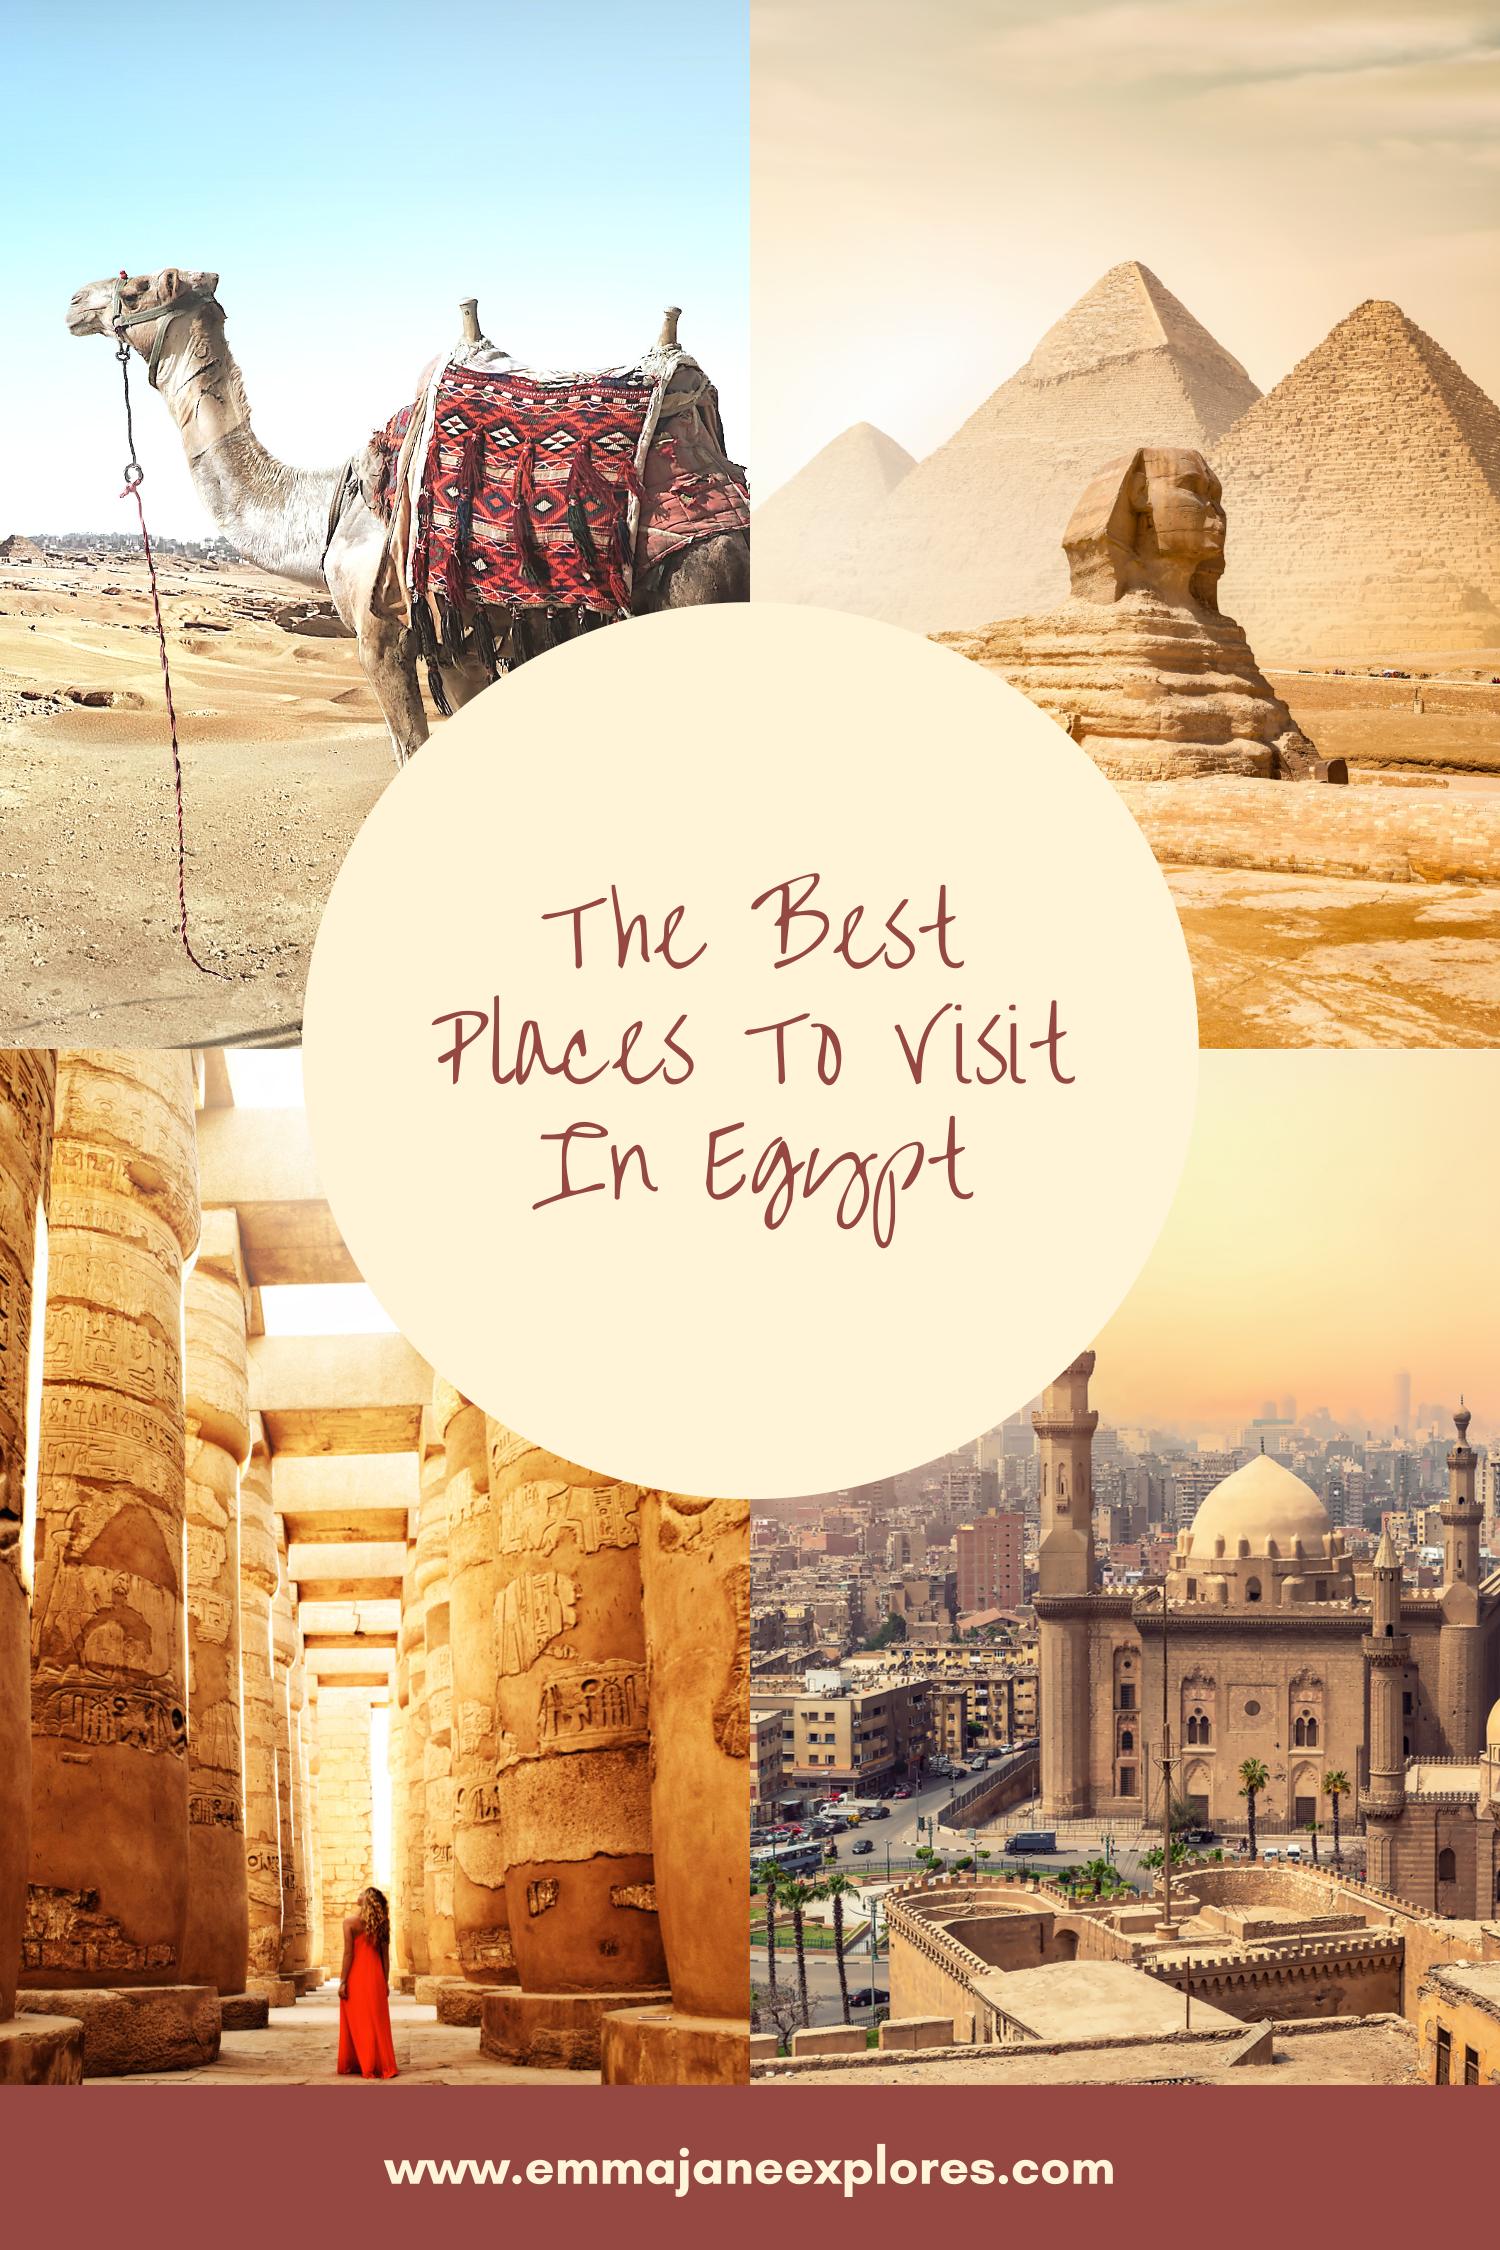 The Best Places To Go In Egypt - Emma Jane Explores